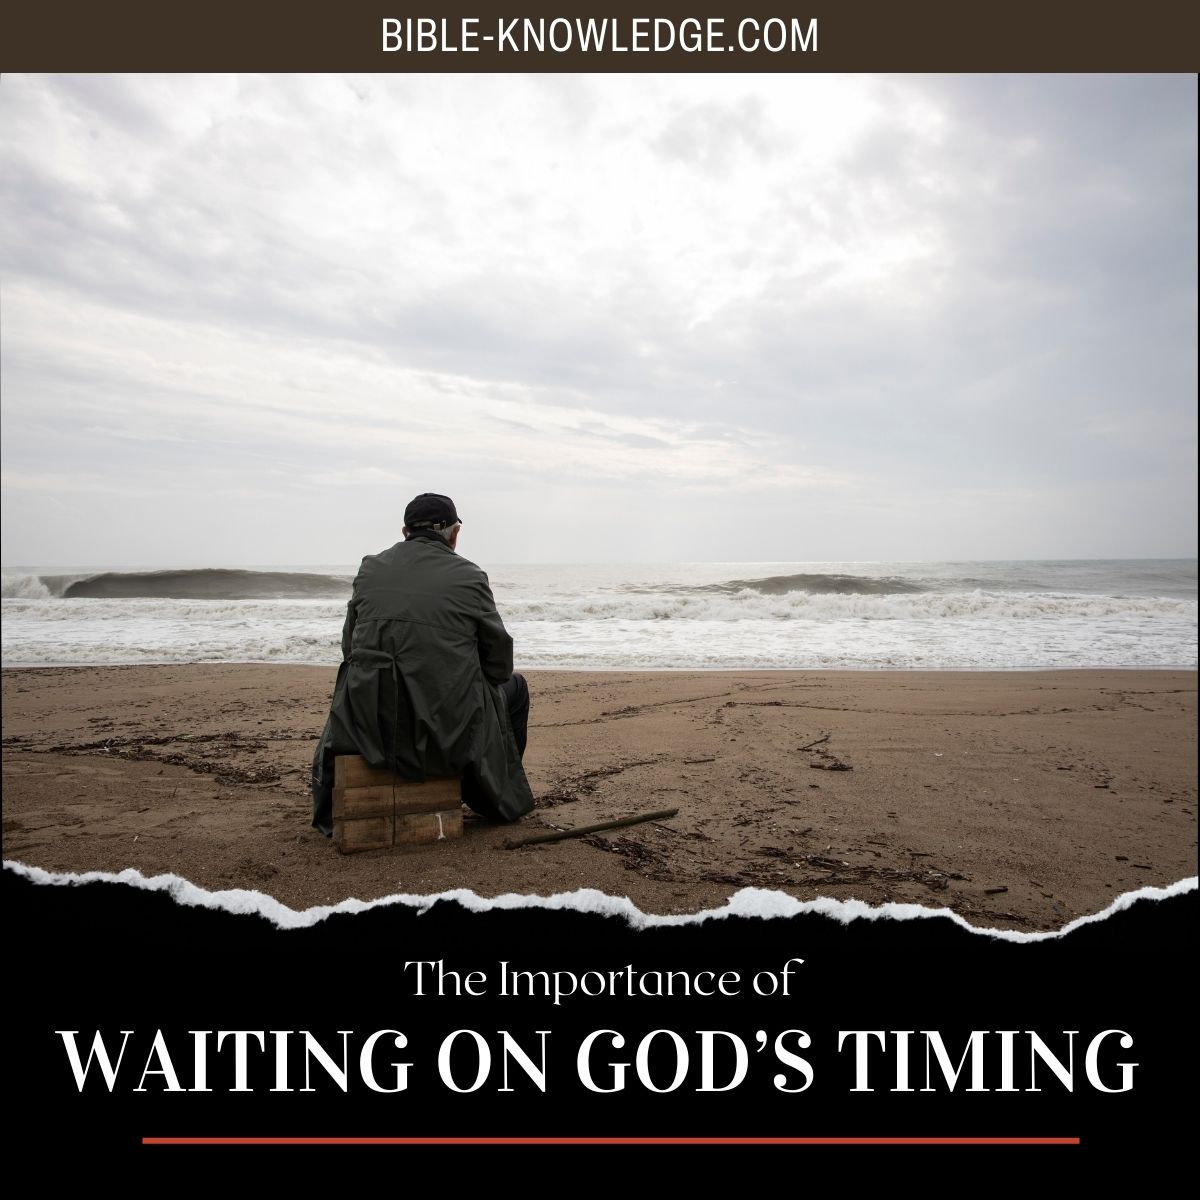 The Importance of Waiting on God’s Timing